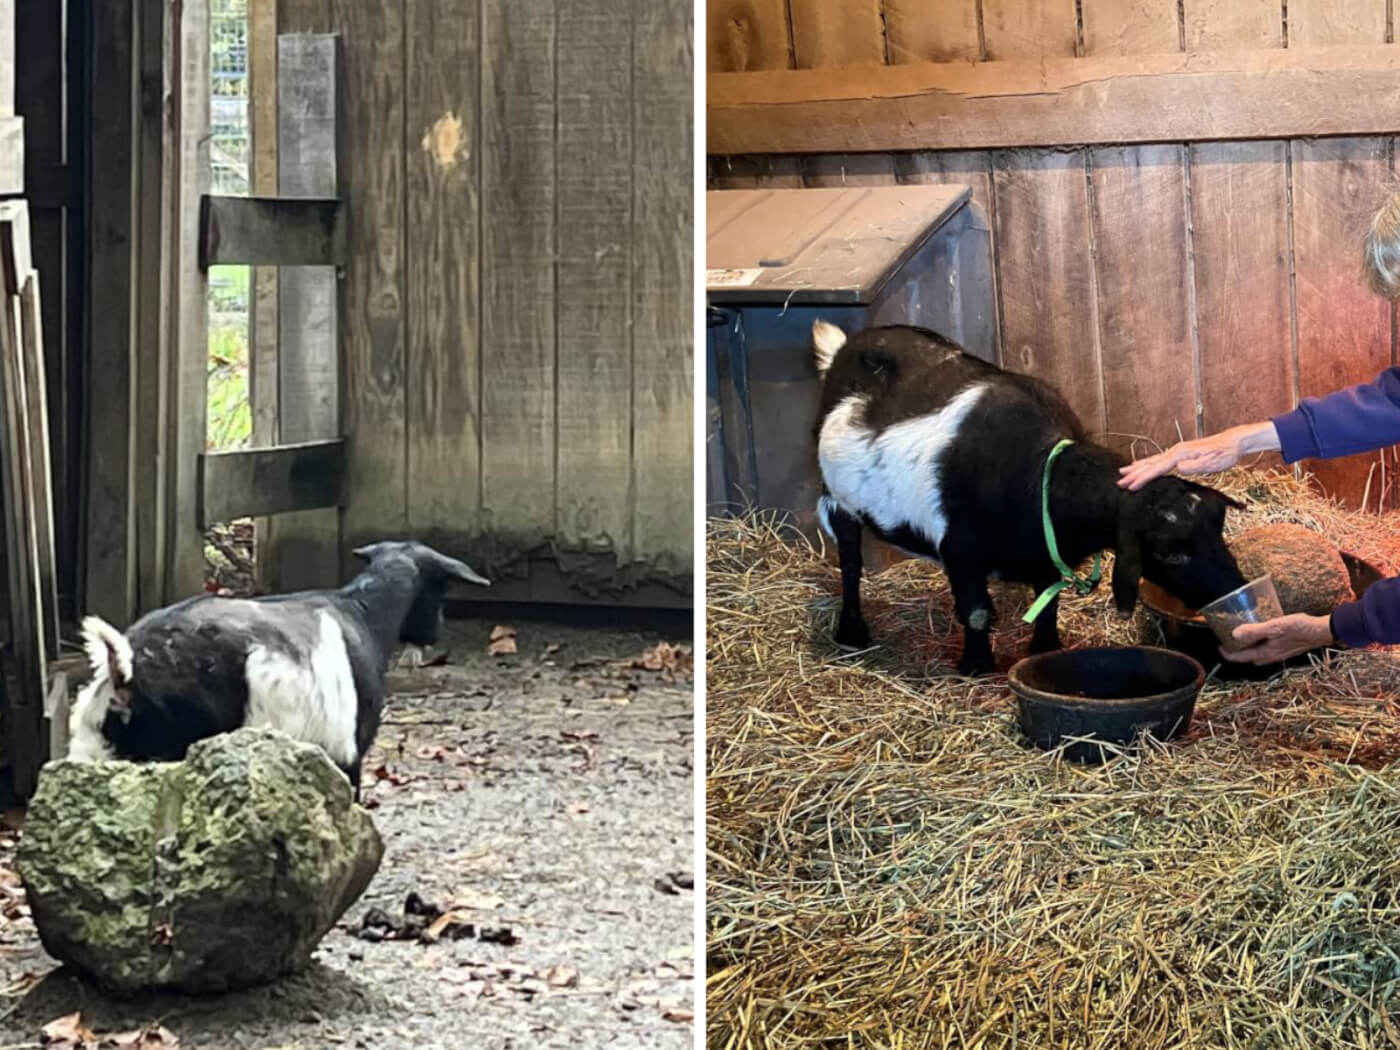 a photo composite showing princess the goat, on the left in her filthy enclosure at at tri-state zoo and on the right, being hand-fed in her quarantine at poplar spring animal sanctuary